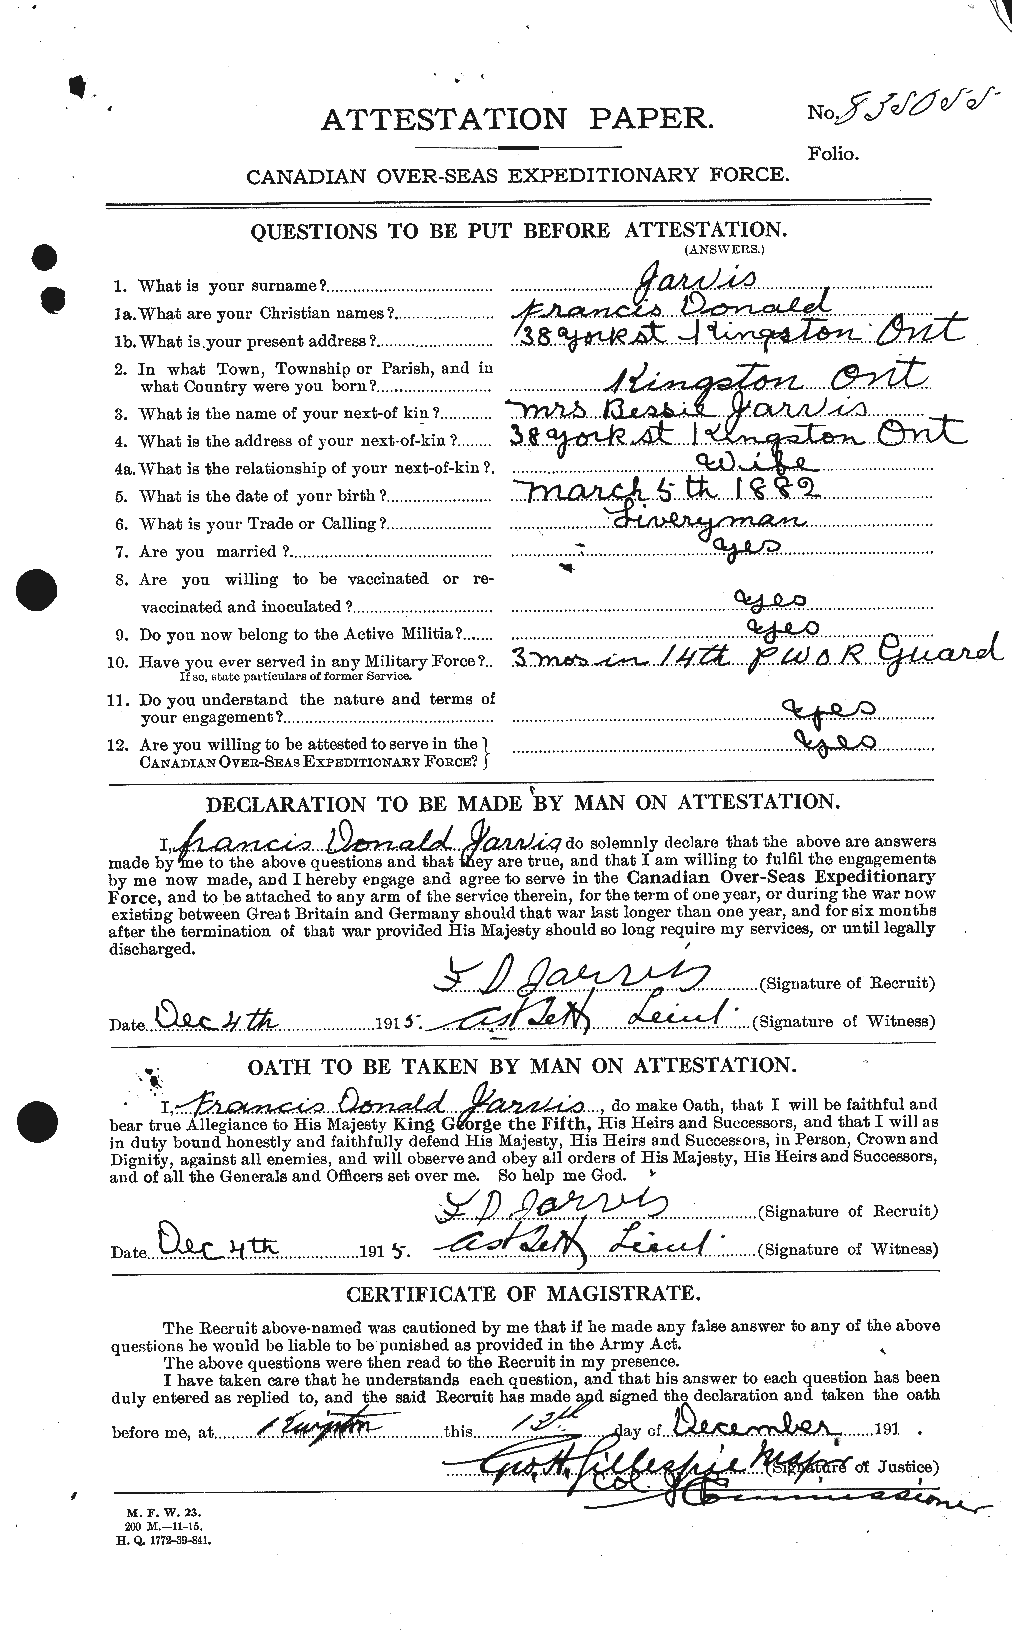 Personnel Records of the First World War - CEF 414684a